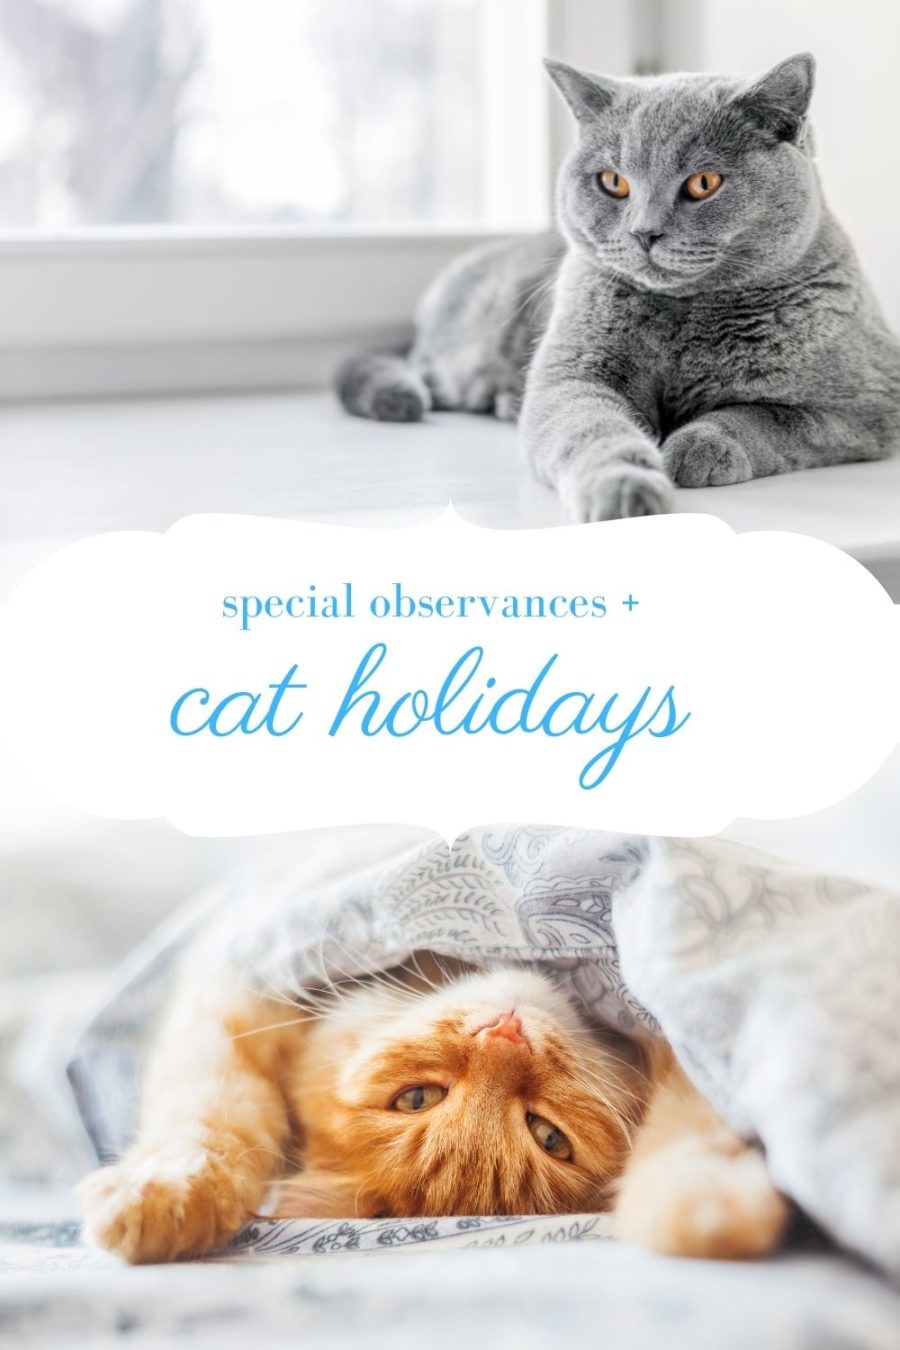 cat holidays and special observances